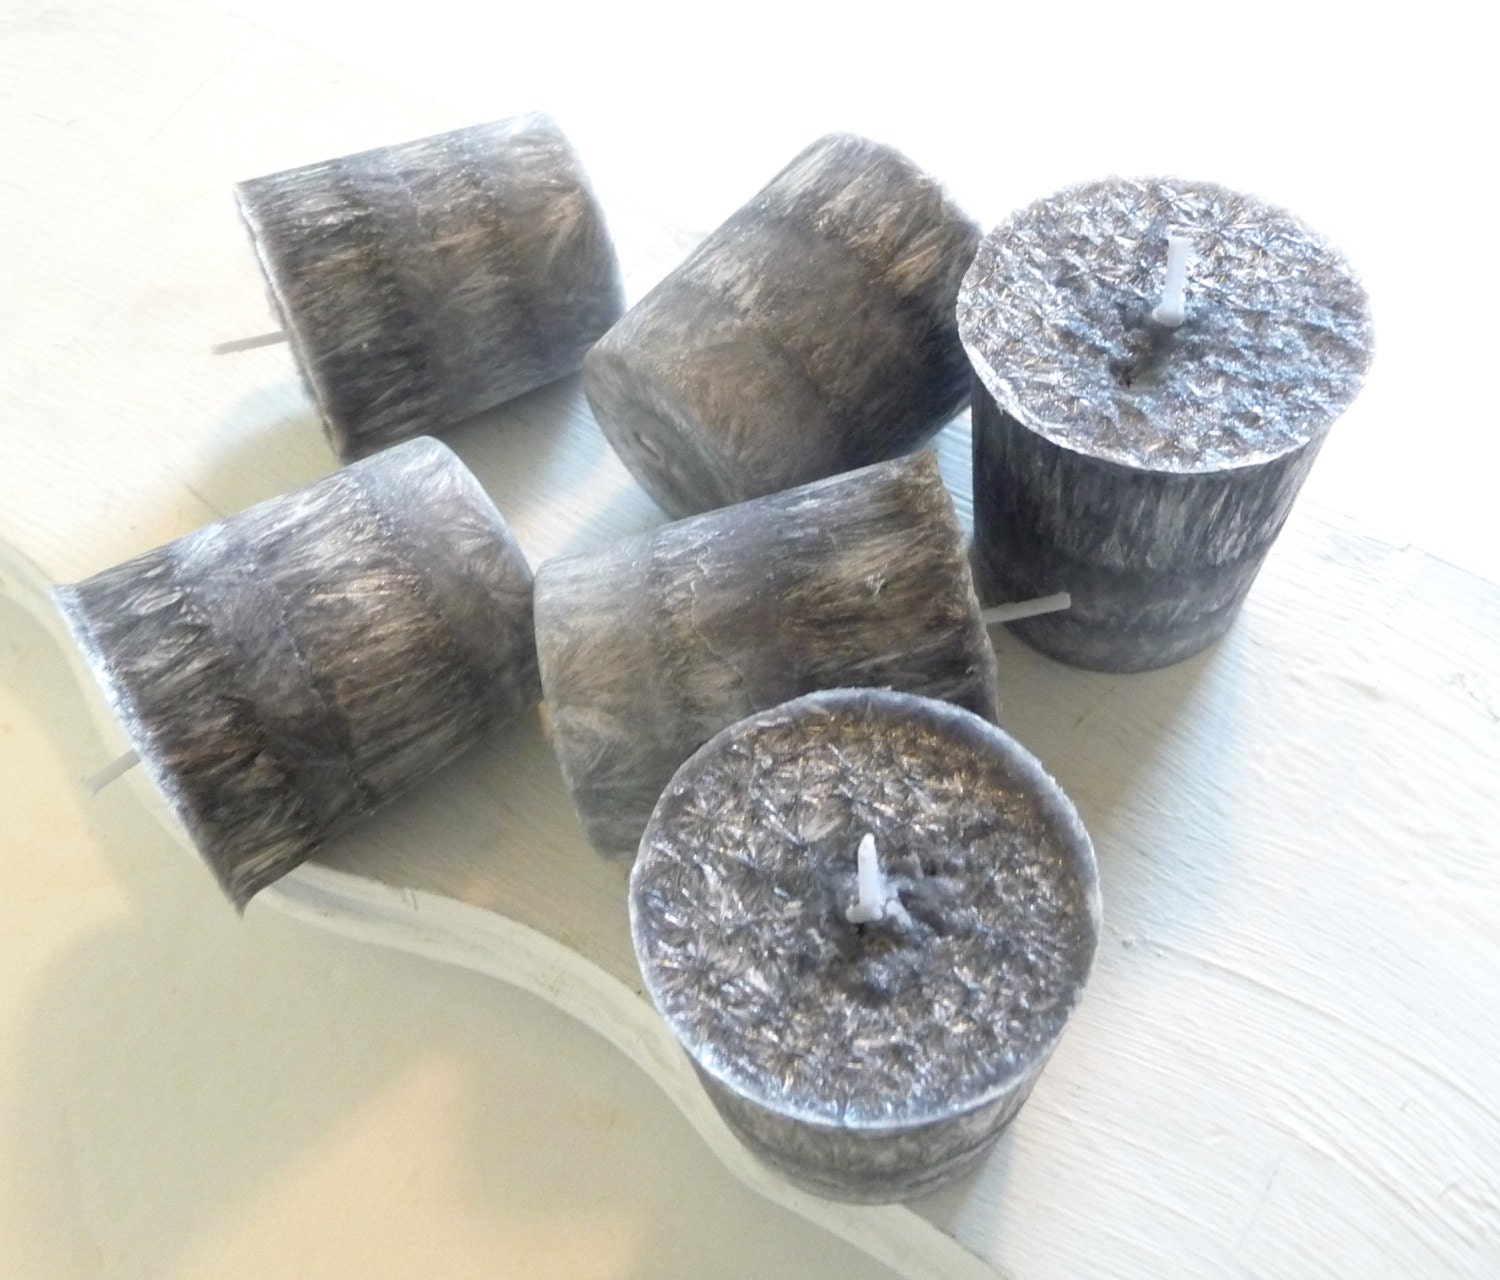 6 Madagascar Spice Palm Wax Votive Candles, Black and Gray Candles - Mylana